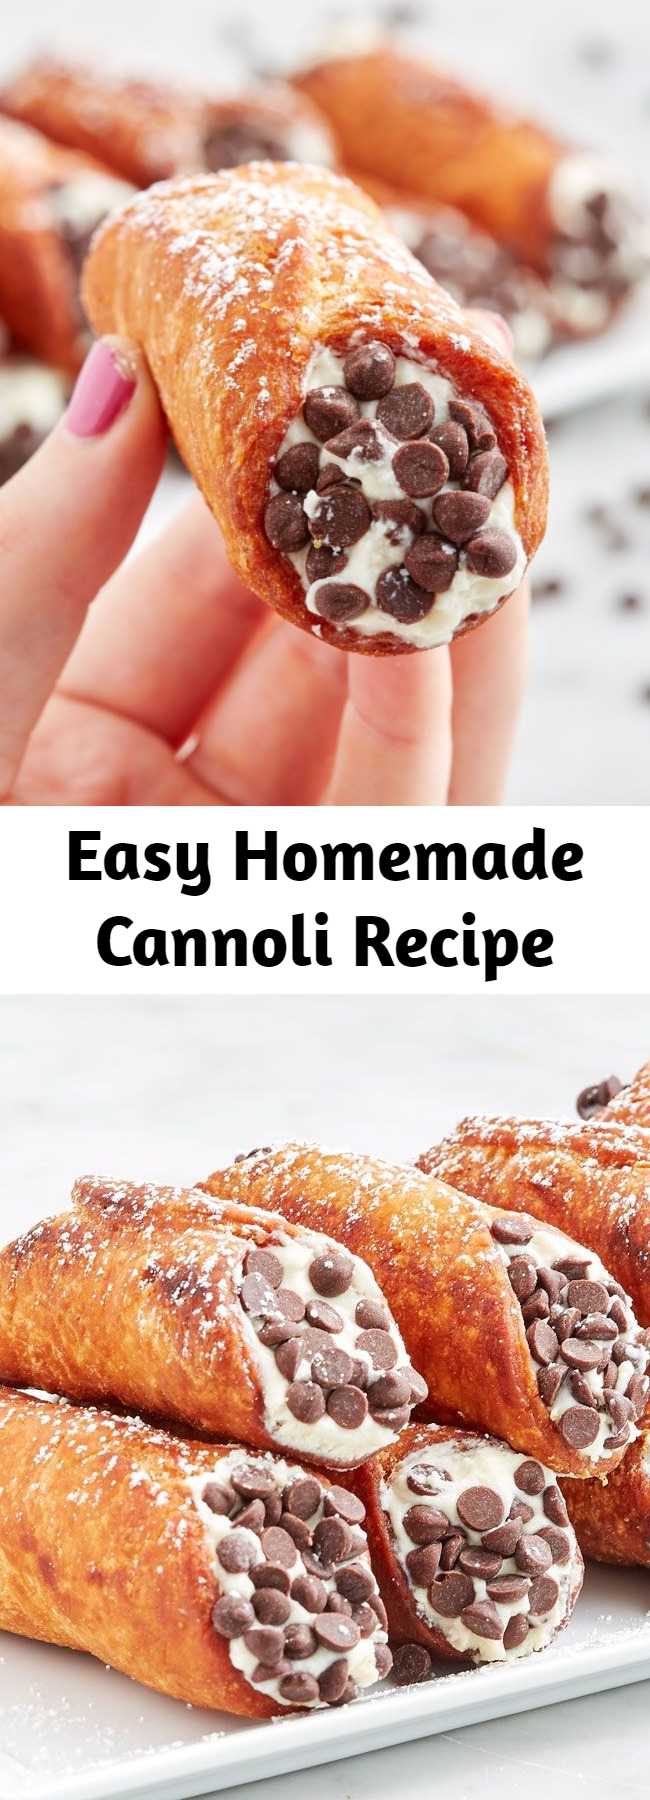 Easy Homemade Cannoli Recipe - The crispy shell and creamy sweet filling are nearly irresistible. Often times, they come with mini chocolate chips or chopped pistachios or dipped in chocolate. No matter what topping you pick, they're a MAJOR treat.